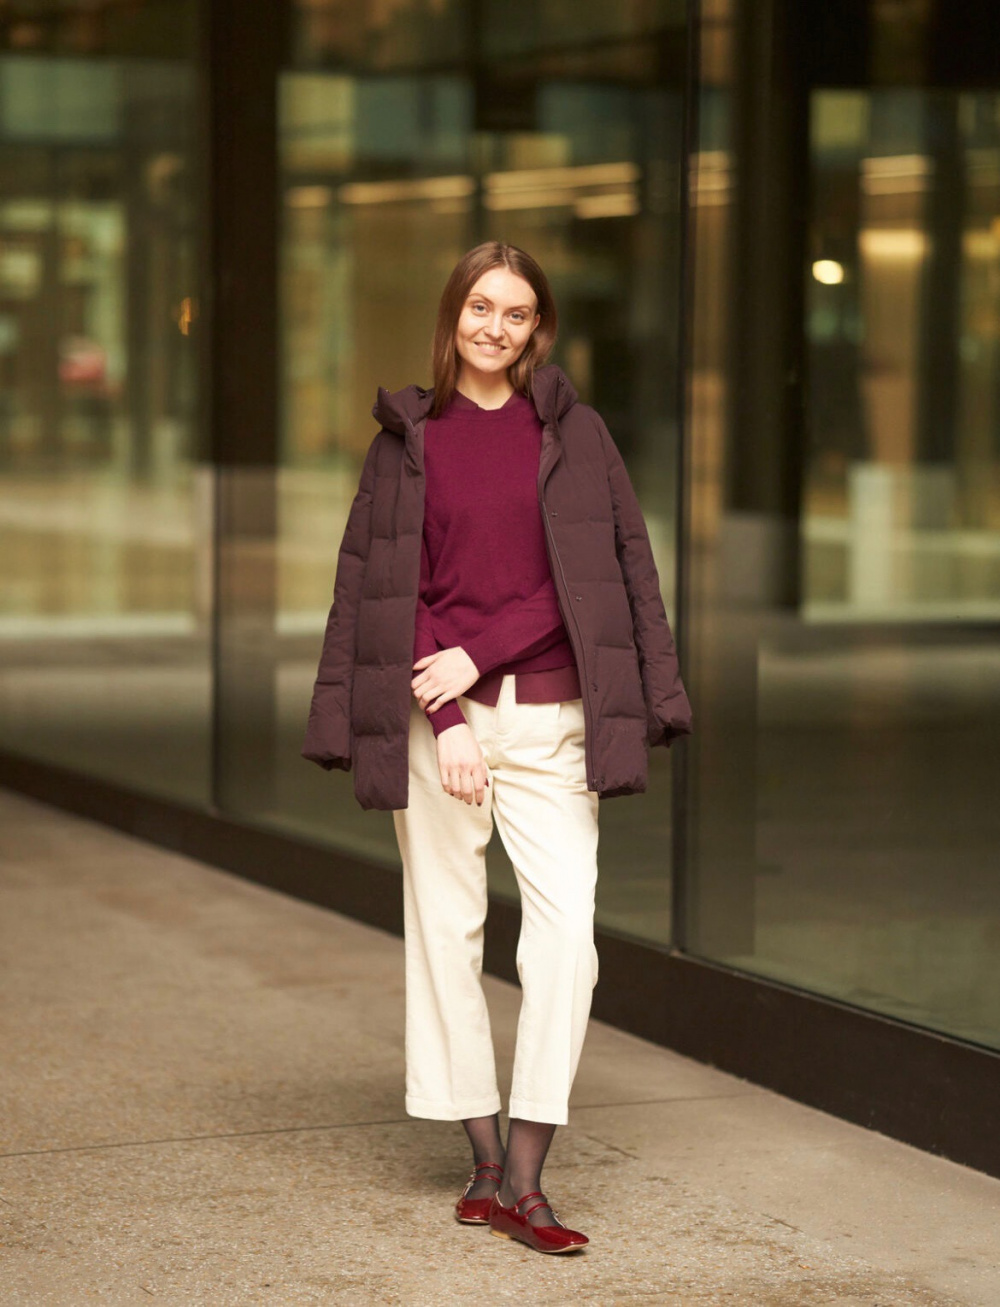 Simple yet Stylish Looks Are Yours When You Combine Loose Items and Leggings!, UNIQLO TODAY